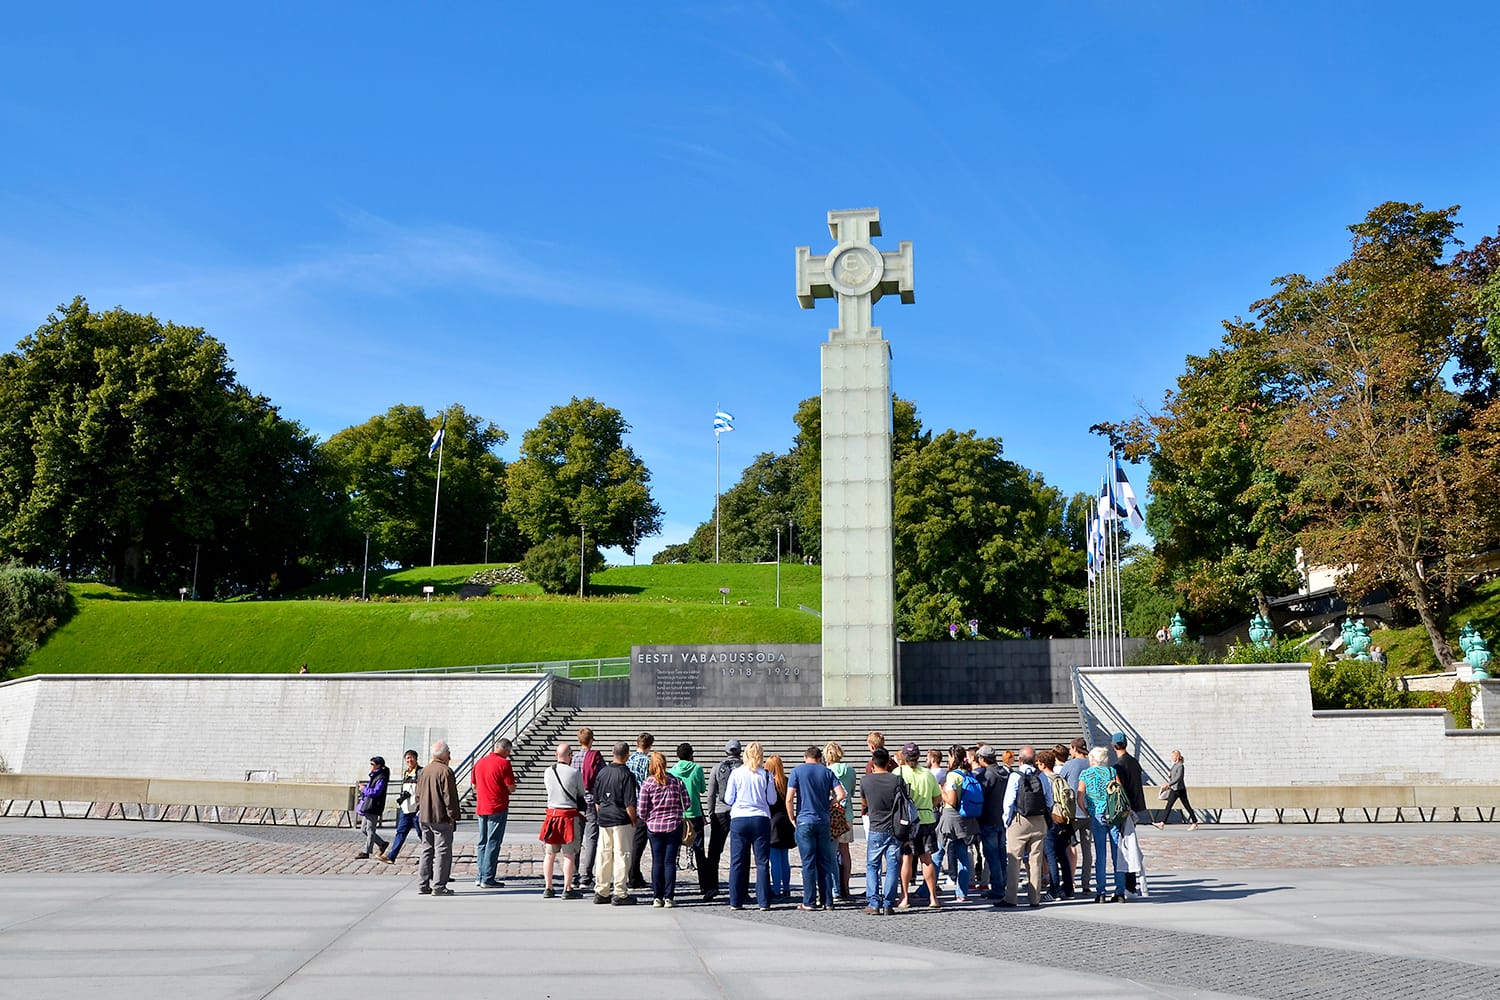 Tourists visiting Freedom Square, the War of Independence Victory Column in Tallinn, Estonia